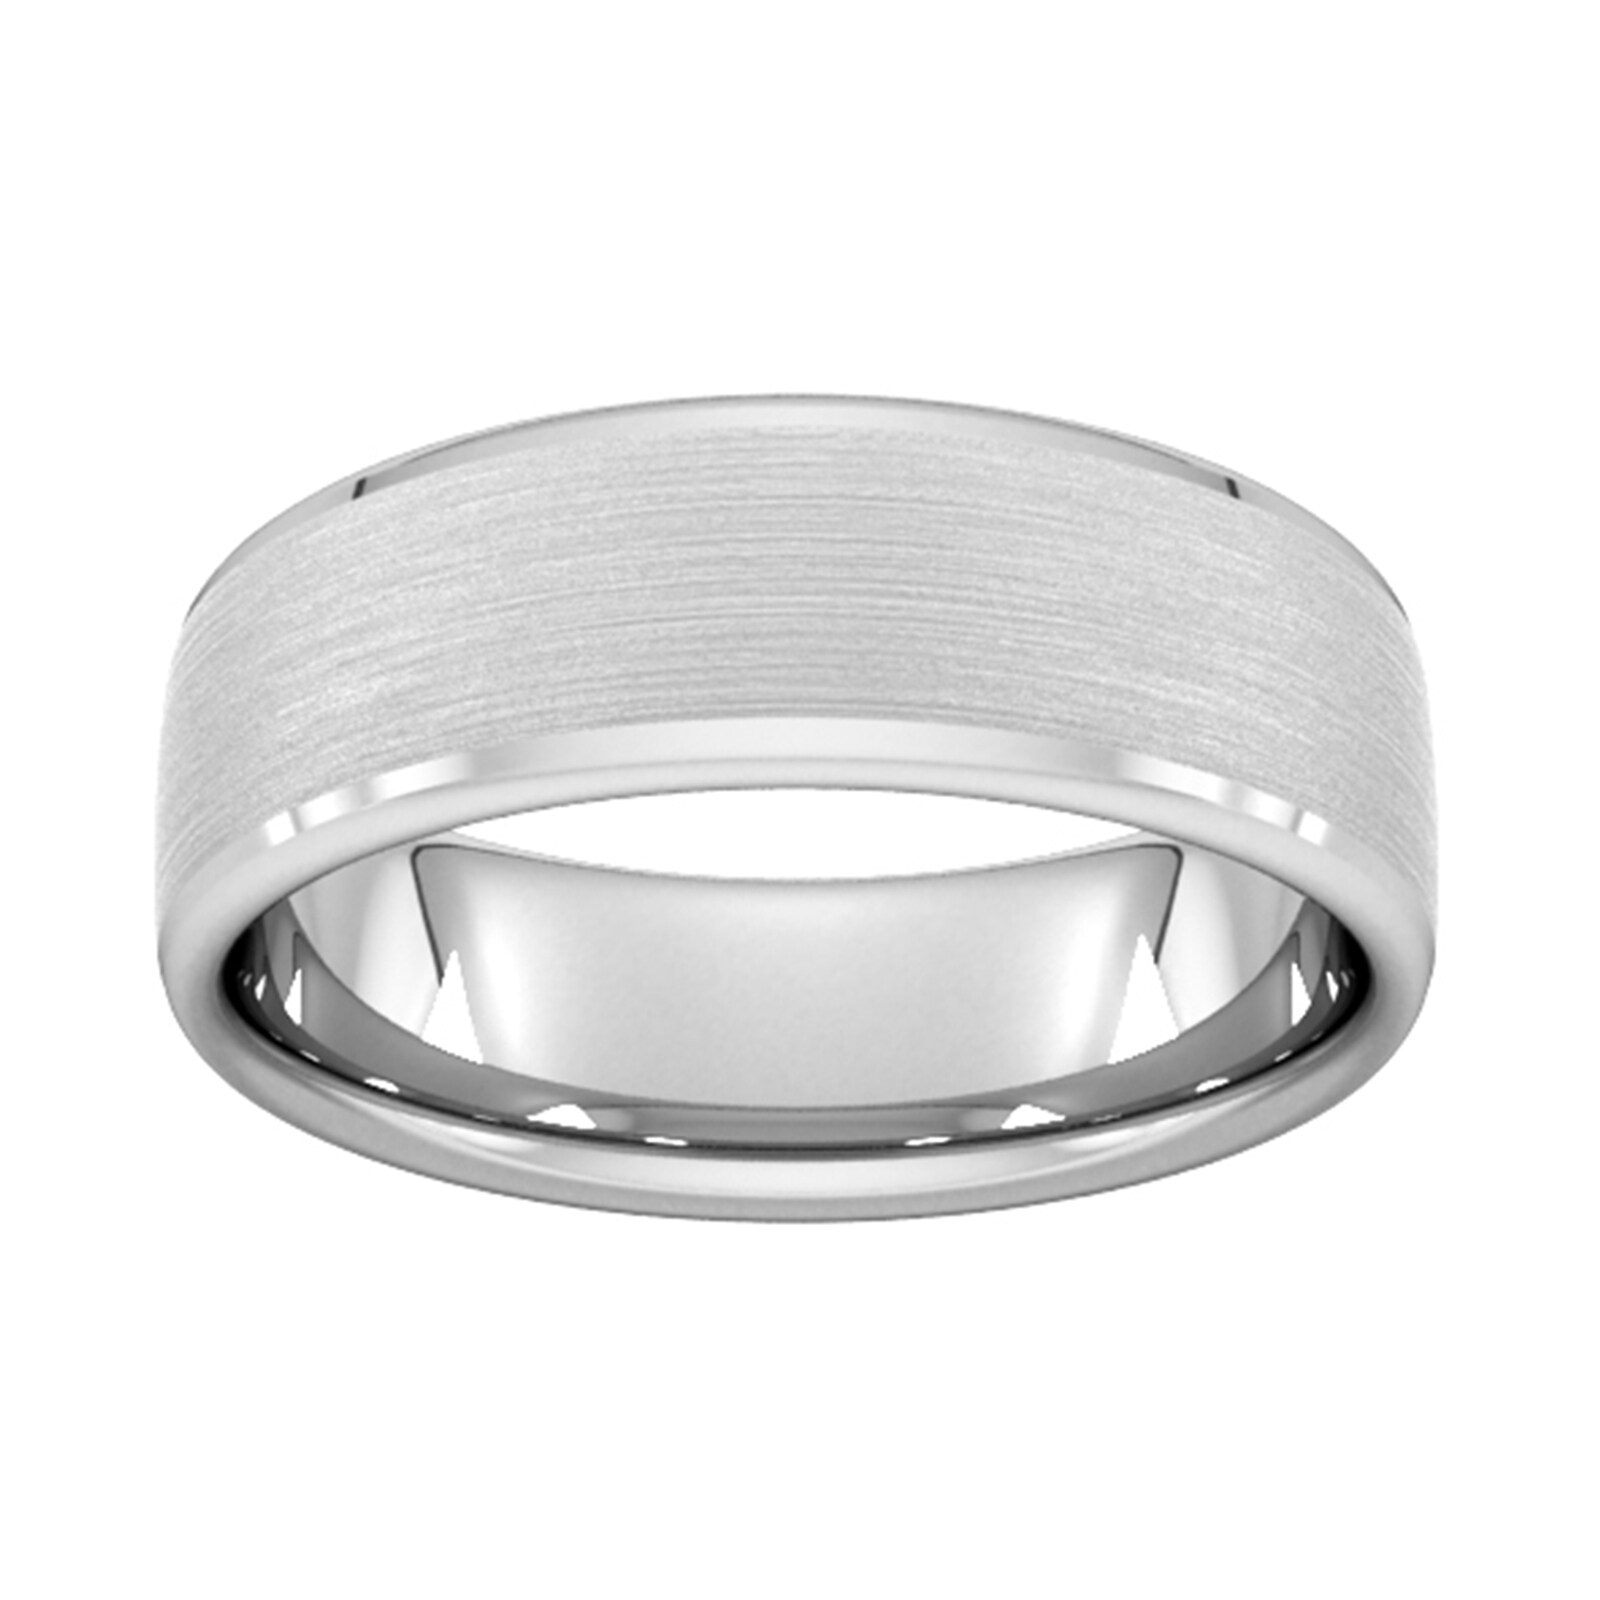 7mm Slight Court Standard Polished Chamfered Edges With Matt Centre Wedding Ring In 18 Carat White Gold - Ring Size S